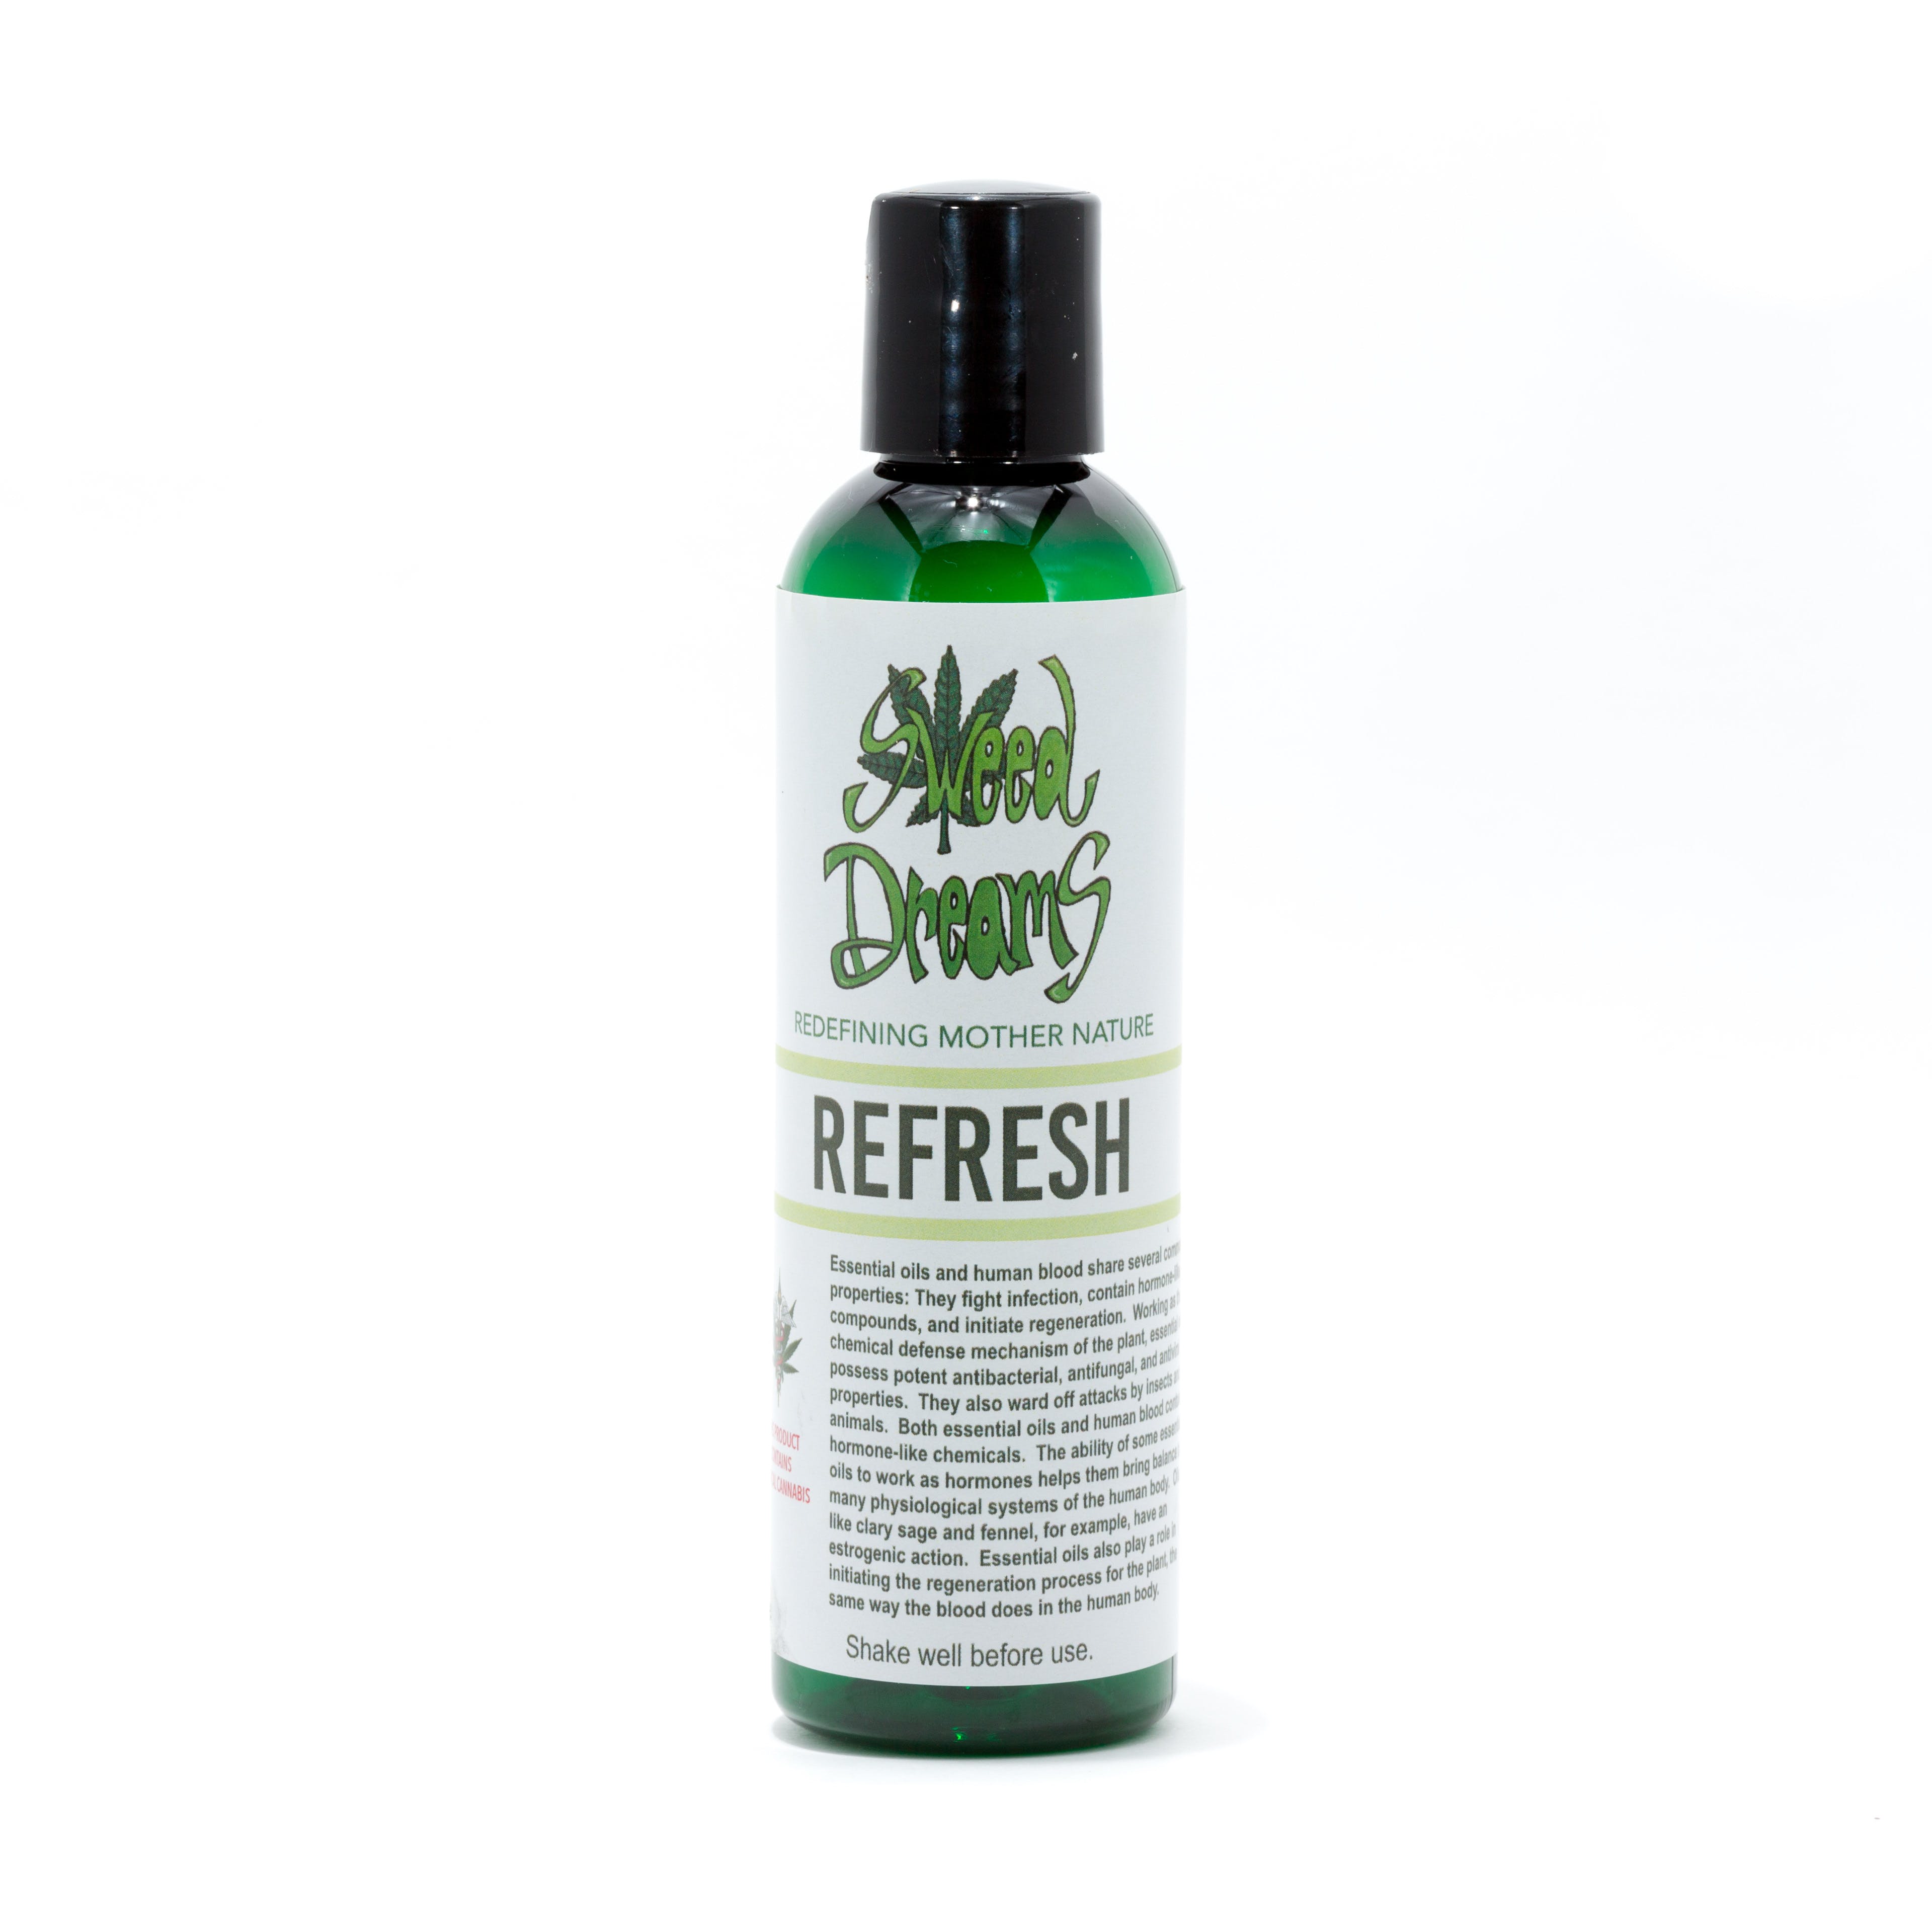 topicals-sweed-dreams-refresh-lotion-4oz